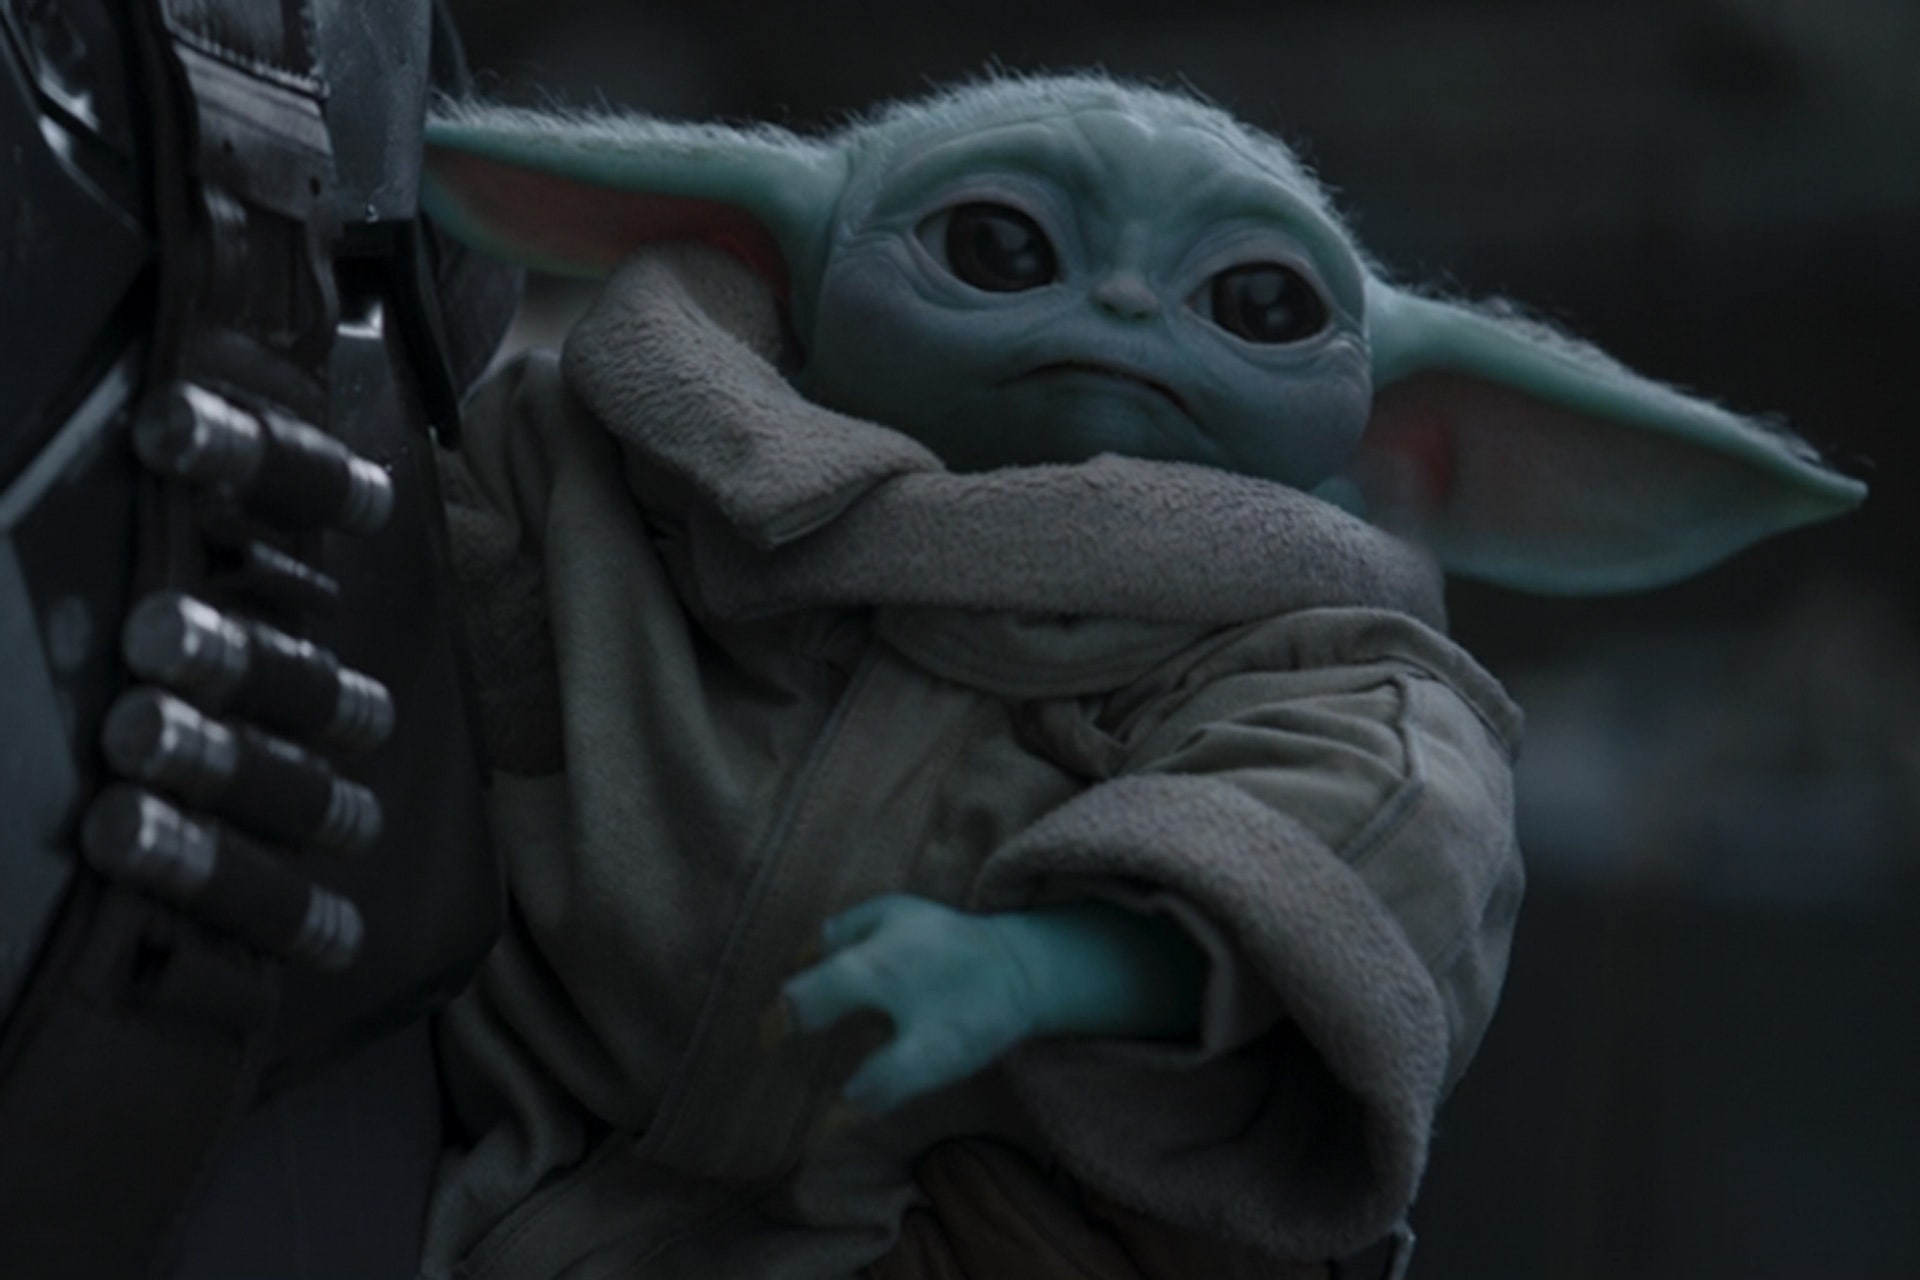 Need A Baby Yoda Gif These Are The Best Ones For You Star Wars Convos Film Daily